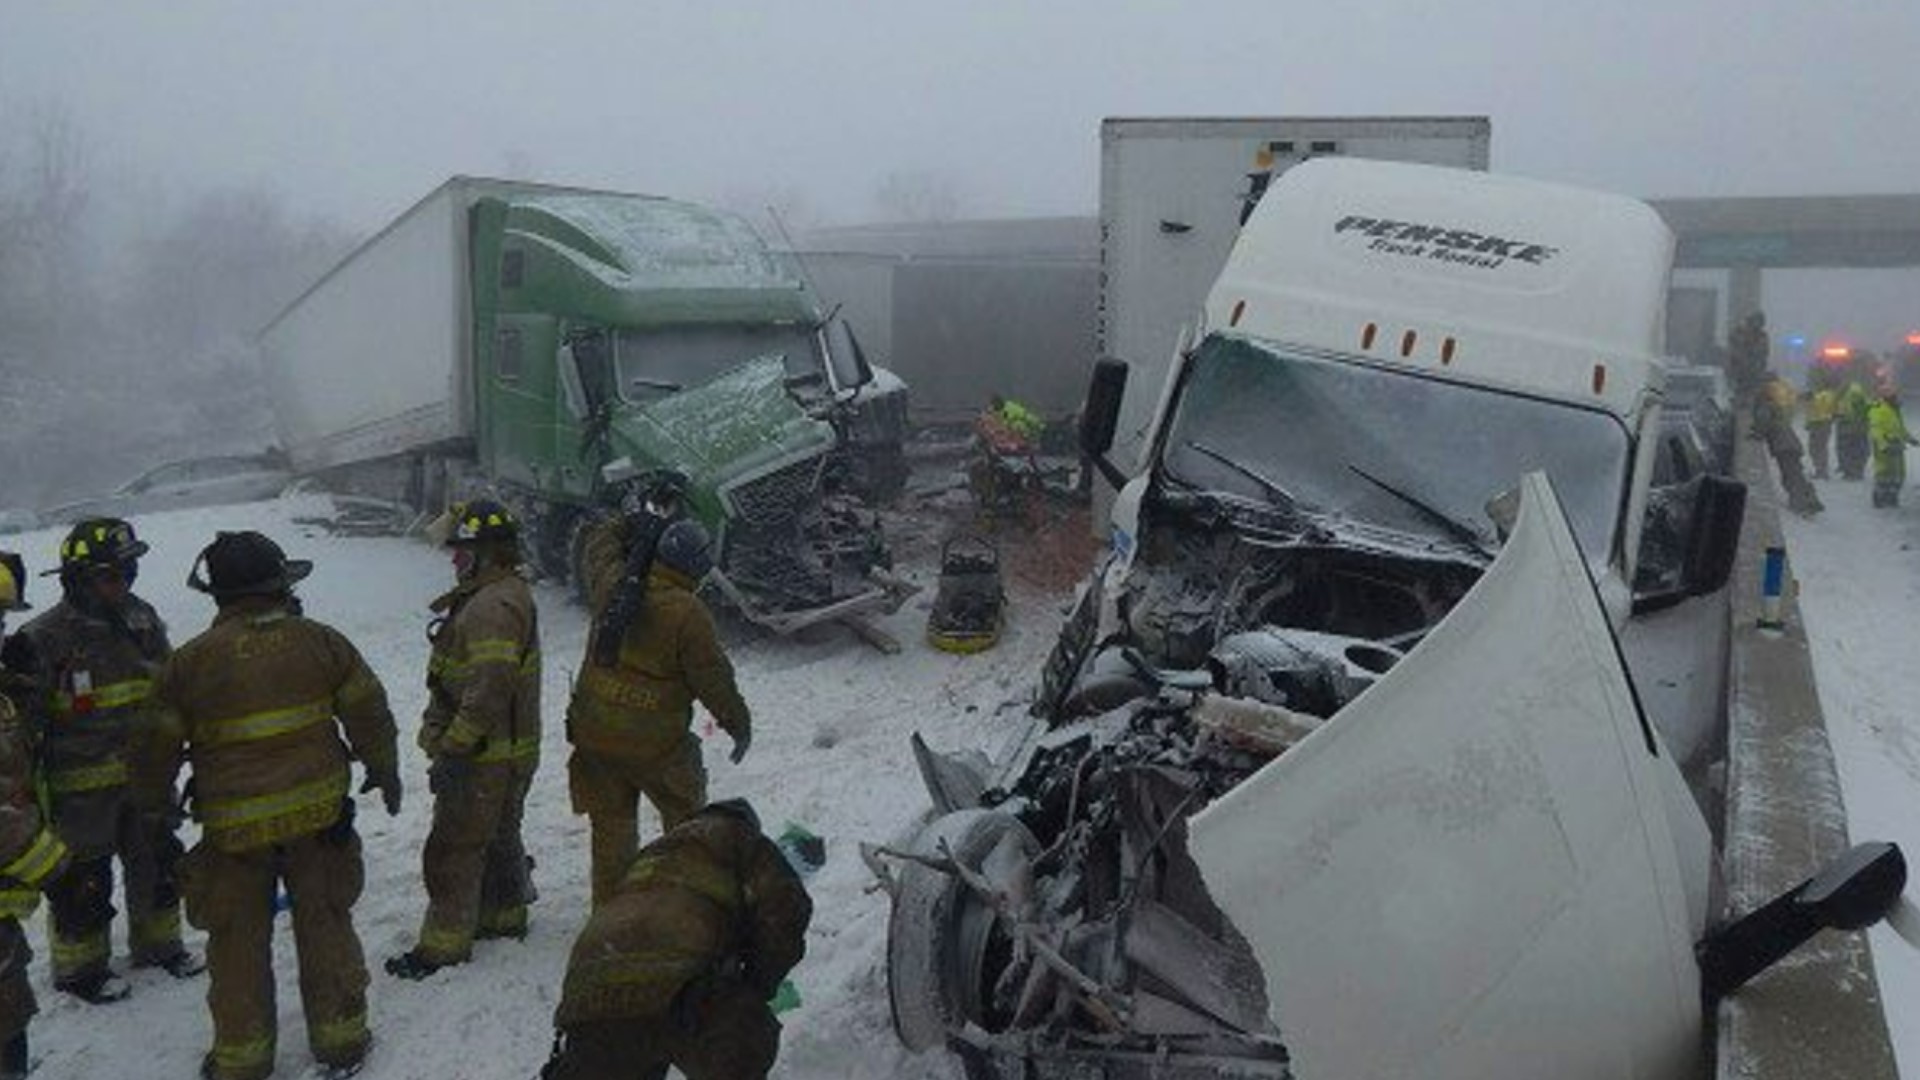 The Ohio State Highway Patrol said there are multiple crashes on the Ohio Turnpike between state Route 53 and state Route 4.